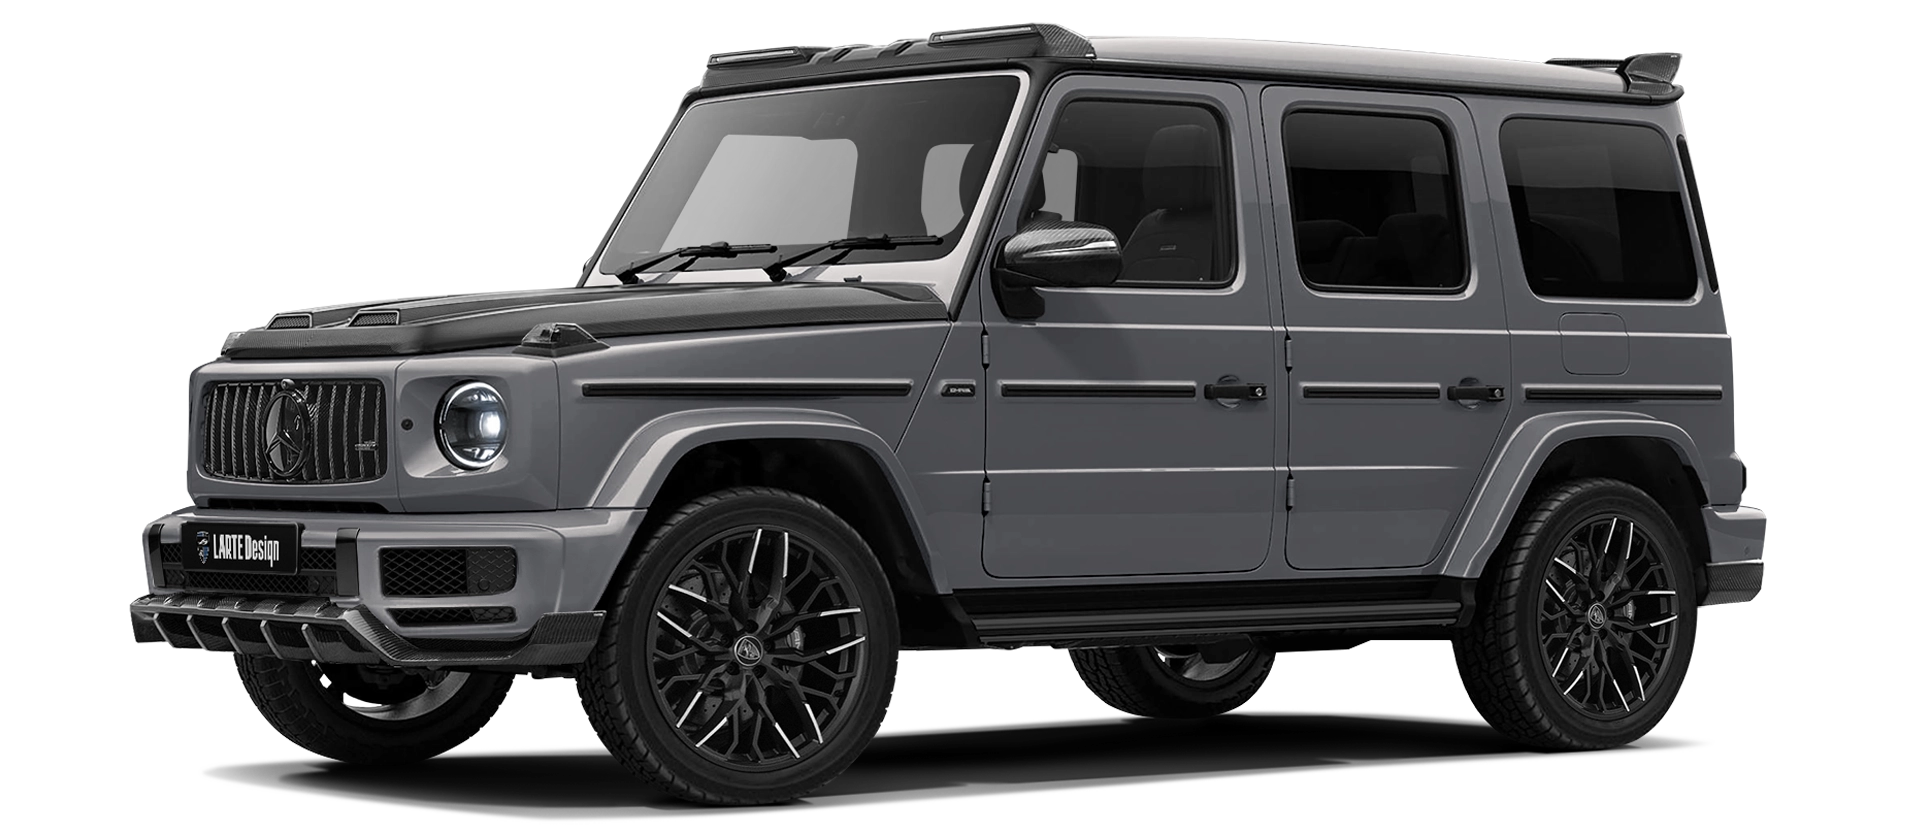 Carbon fiber body kit for Mercedes G-Class in Silver Mojave